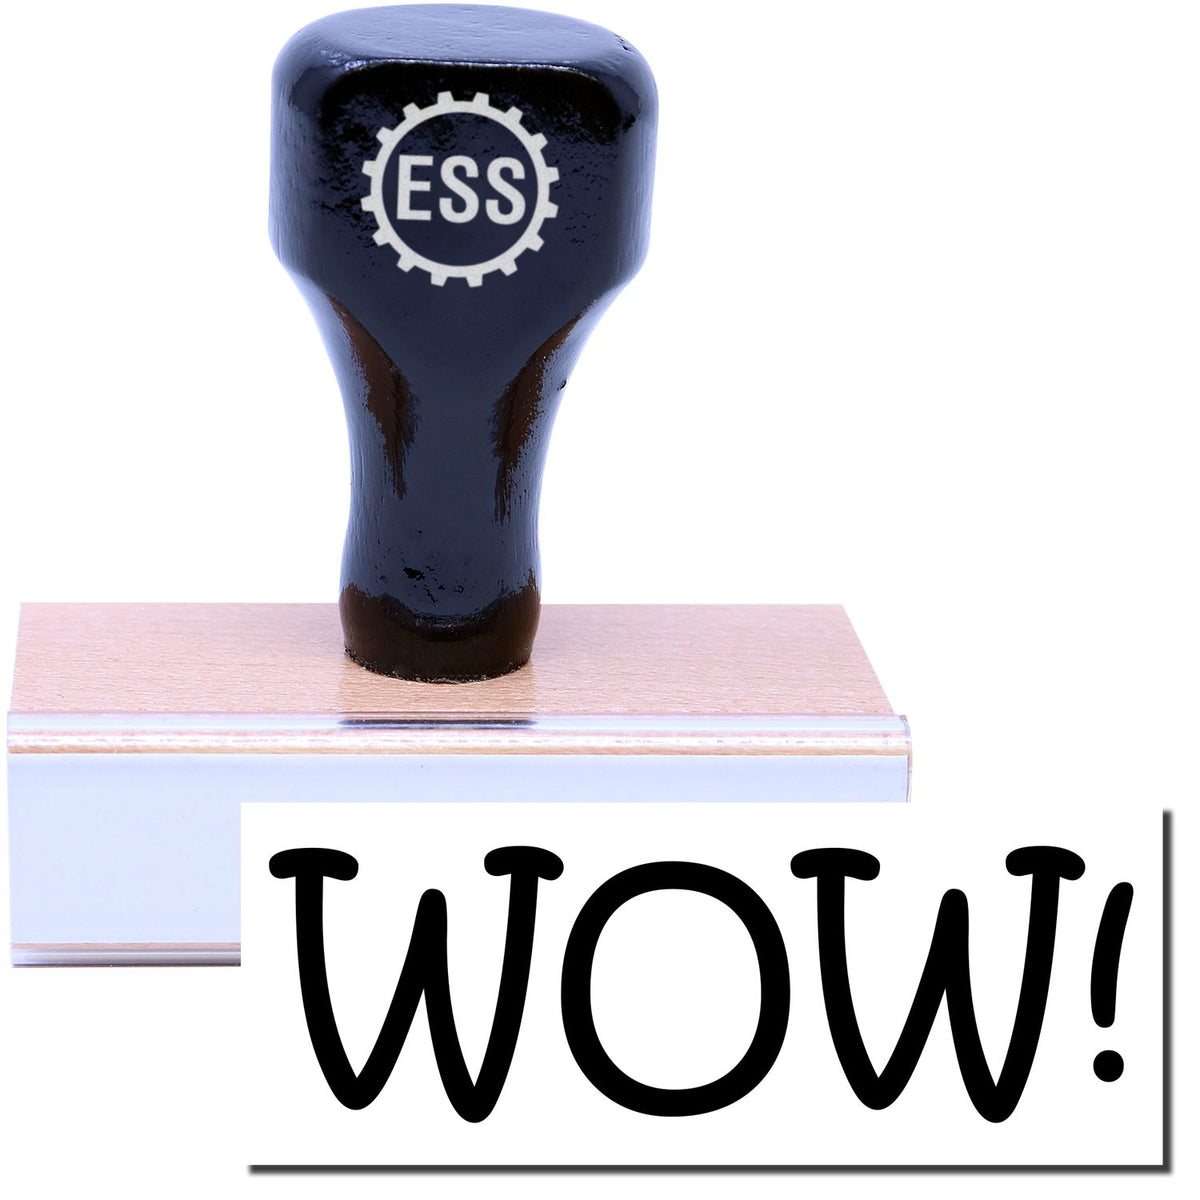 A stock office rubber stamp with a stamped image showing how the text &quot;WOW!&quot; in a large font is displayed after stamping.